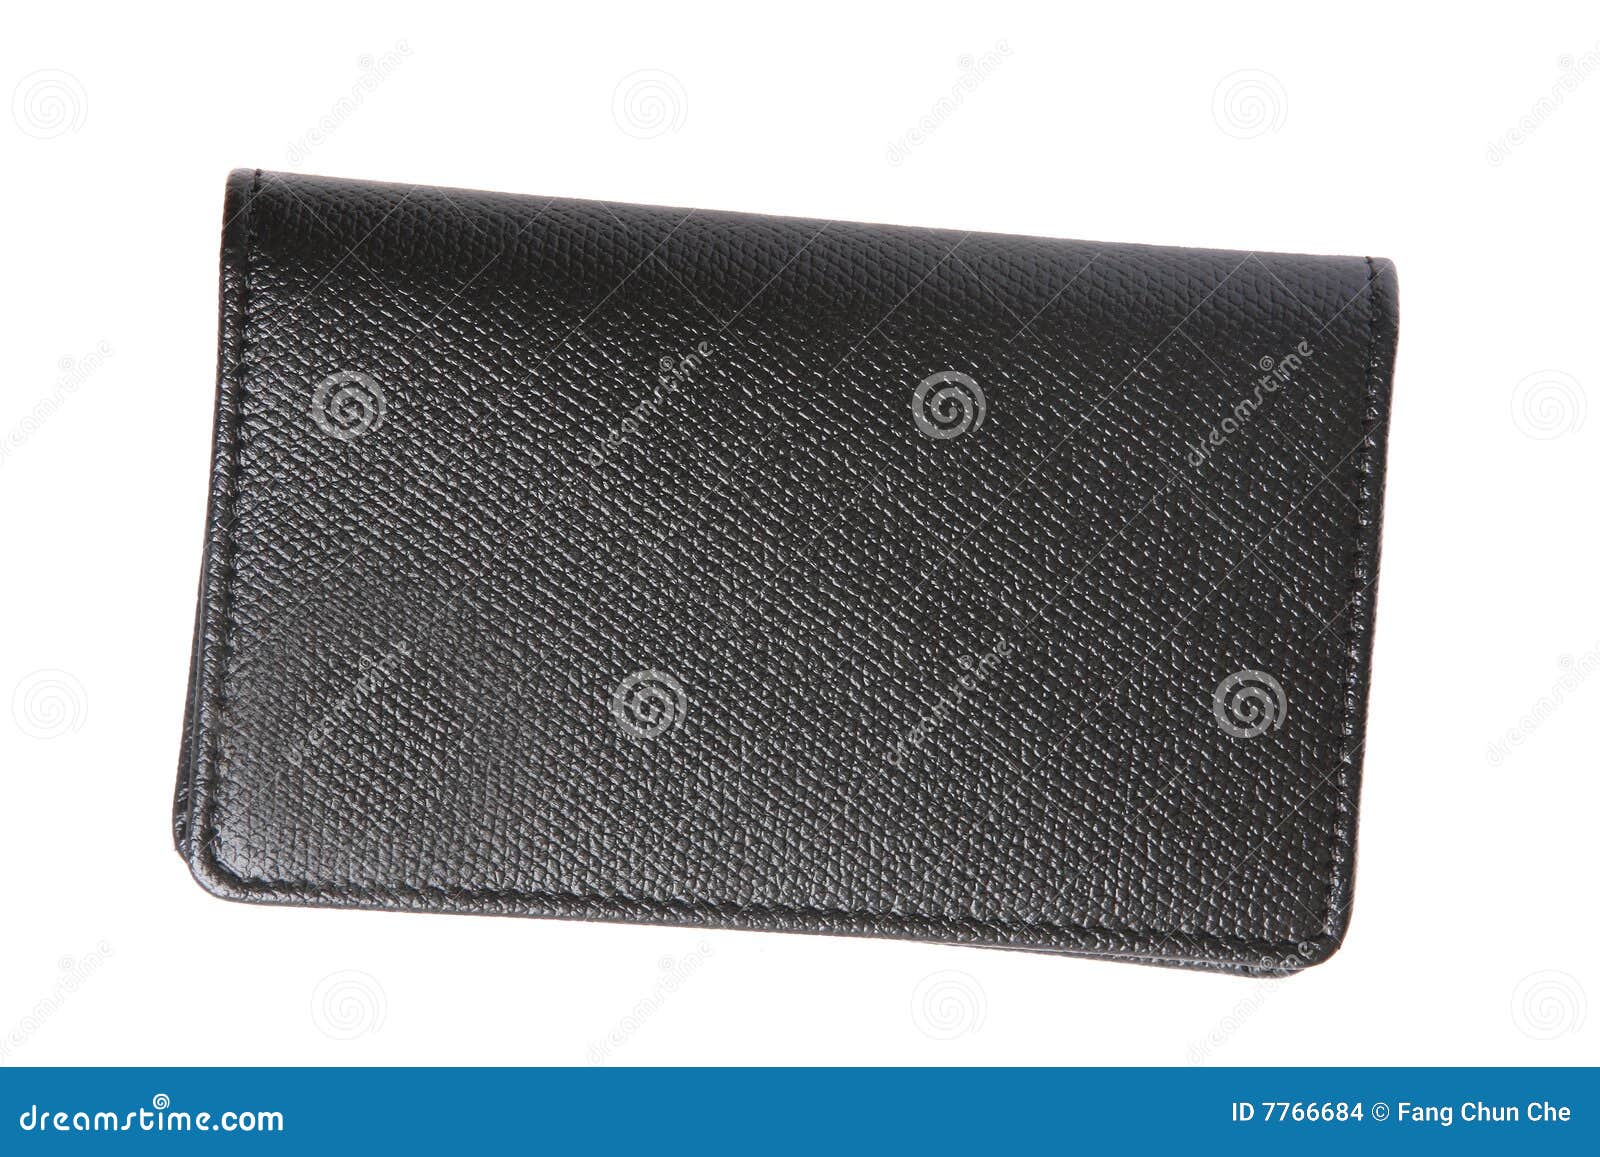 Name card wallet stock photo. Image of wallet, black, female - 7766684